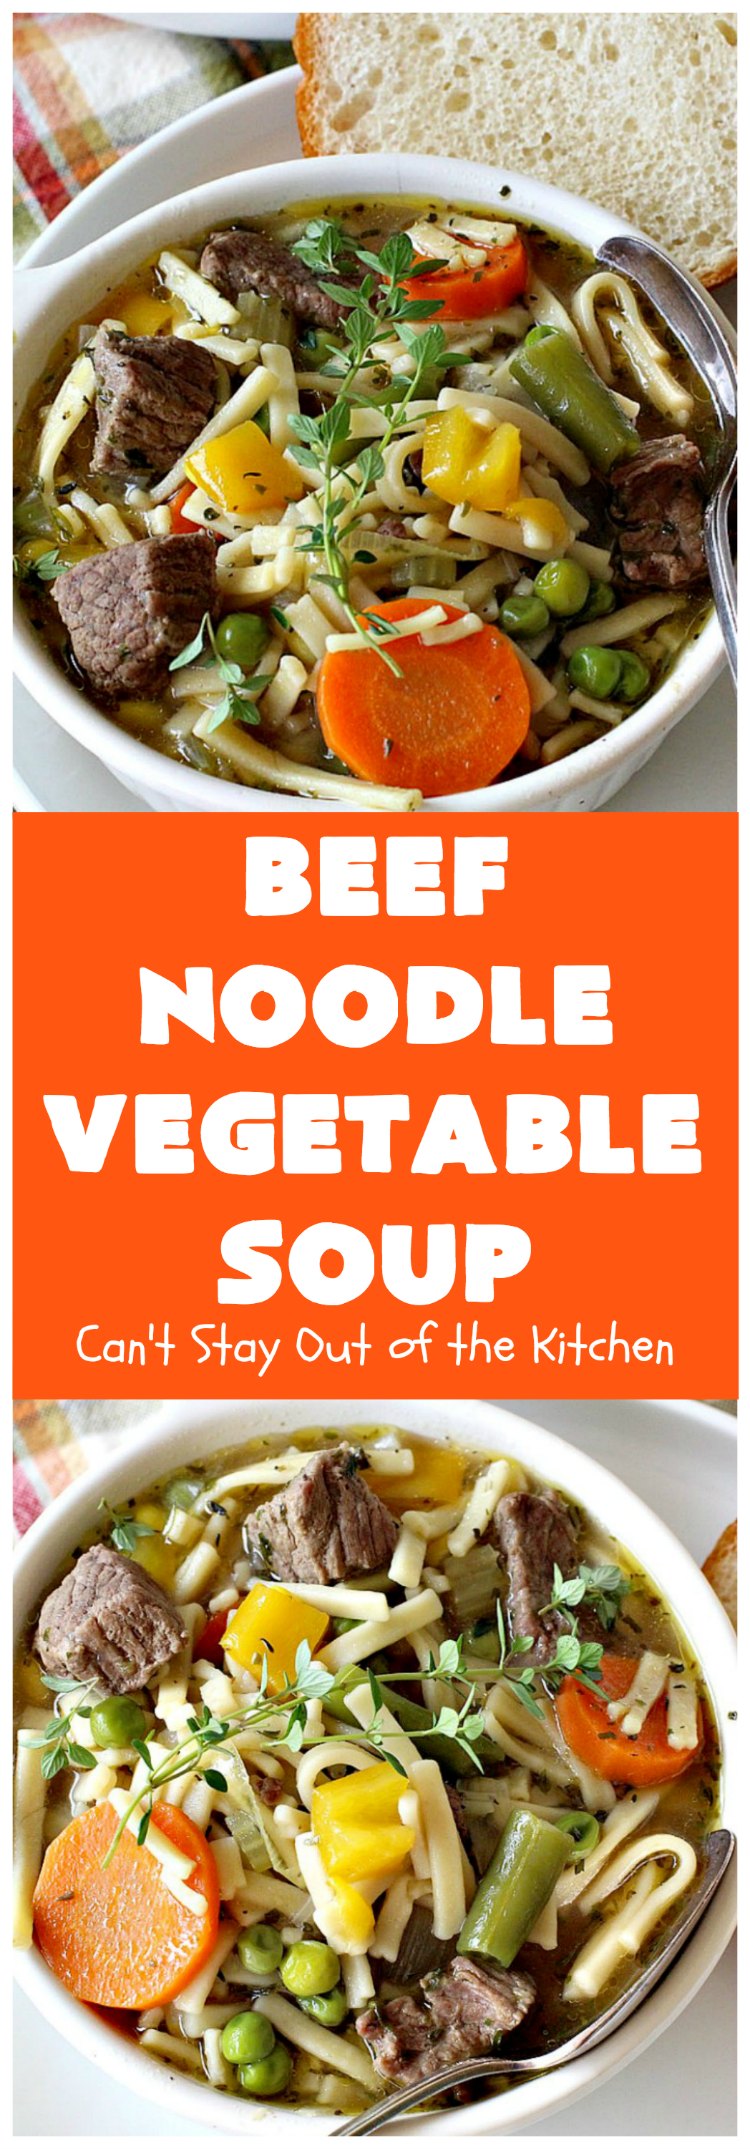 Beef Noodle Vegetable Soup | Can't Stay Out of the Kitchen